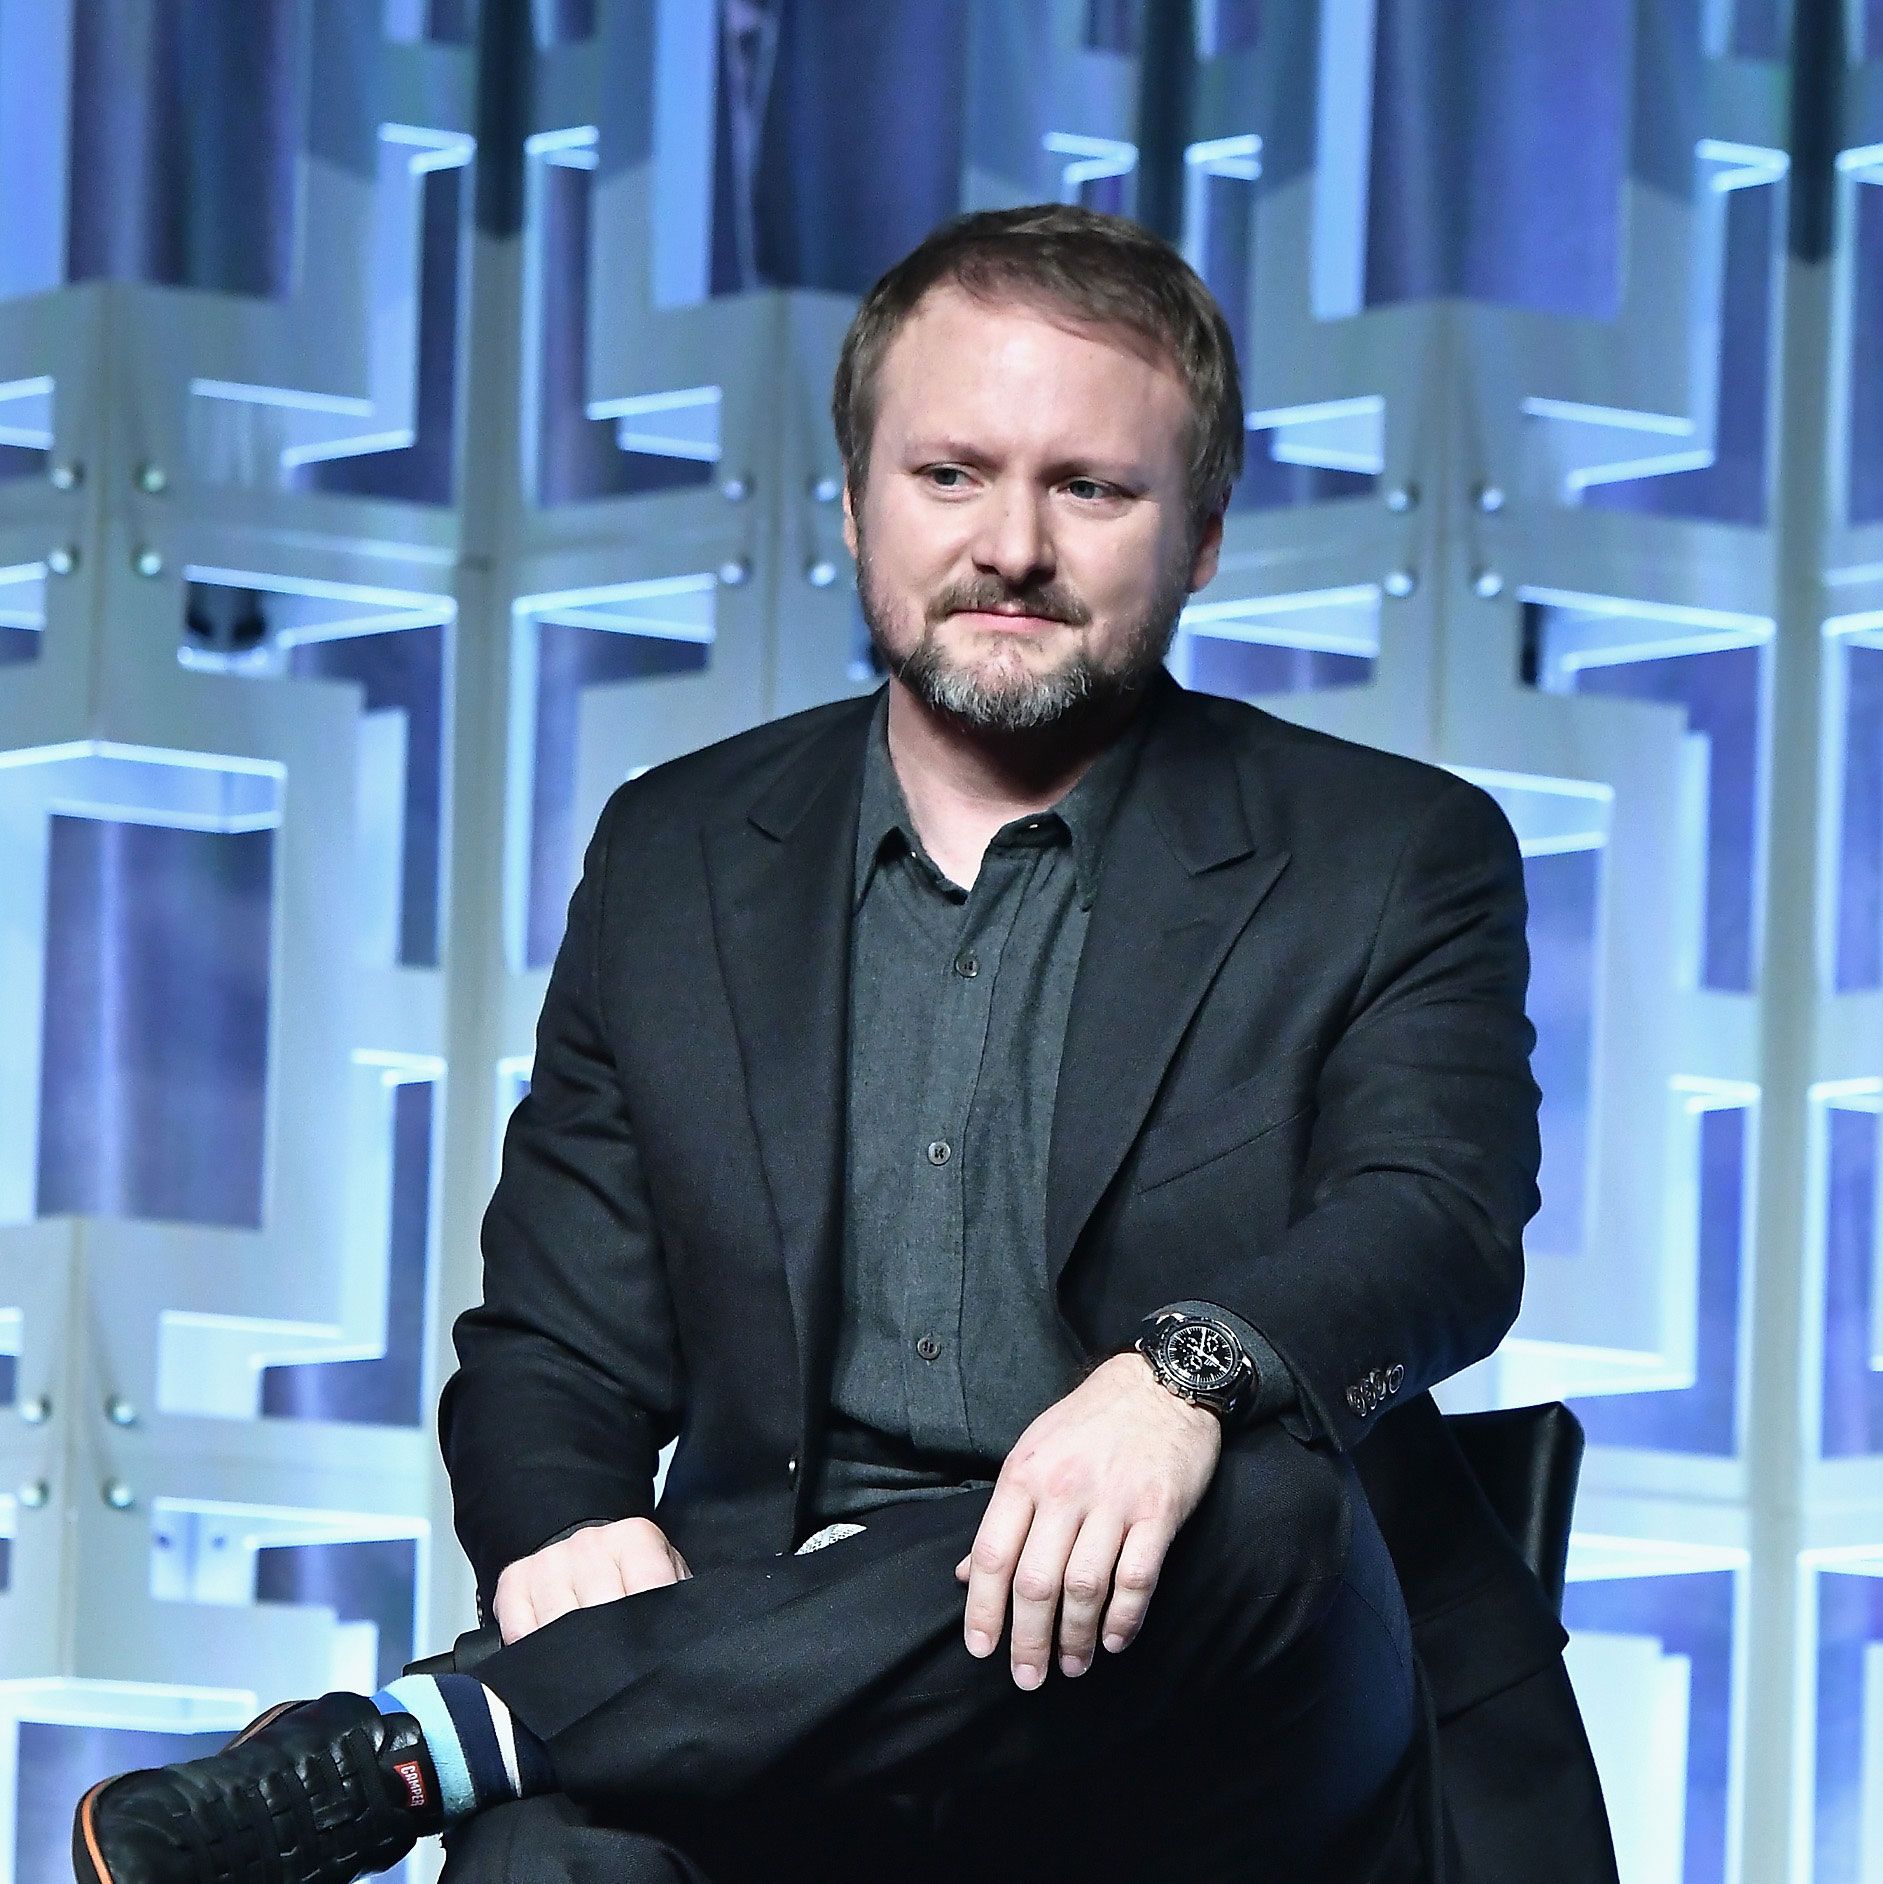 Rian Johnson expanding 'Star Wars' for new trilogy